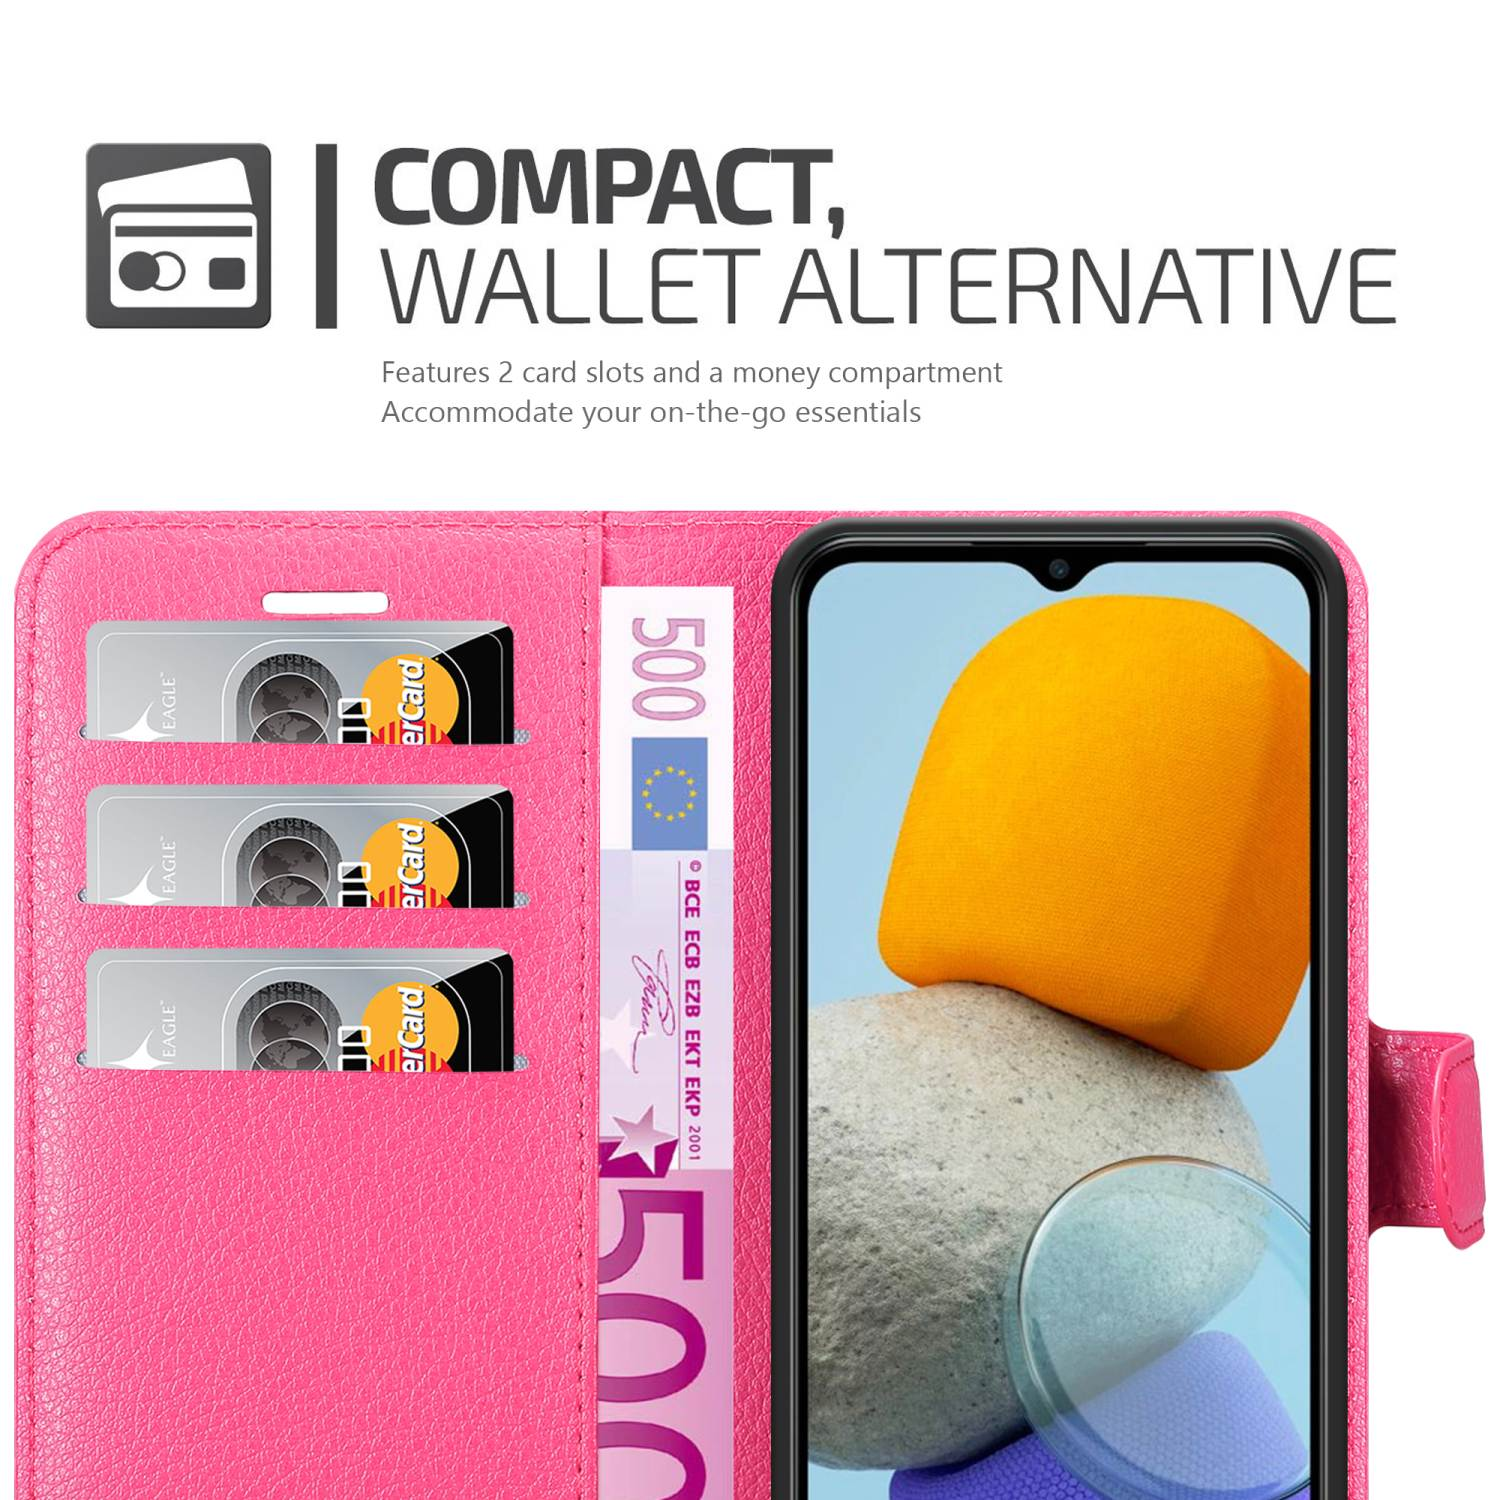 Galaxy CADORABO Bookcover, PINK Standfunktion, Book Samsung, 5G, M23 CHERRY Hülle